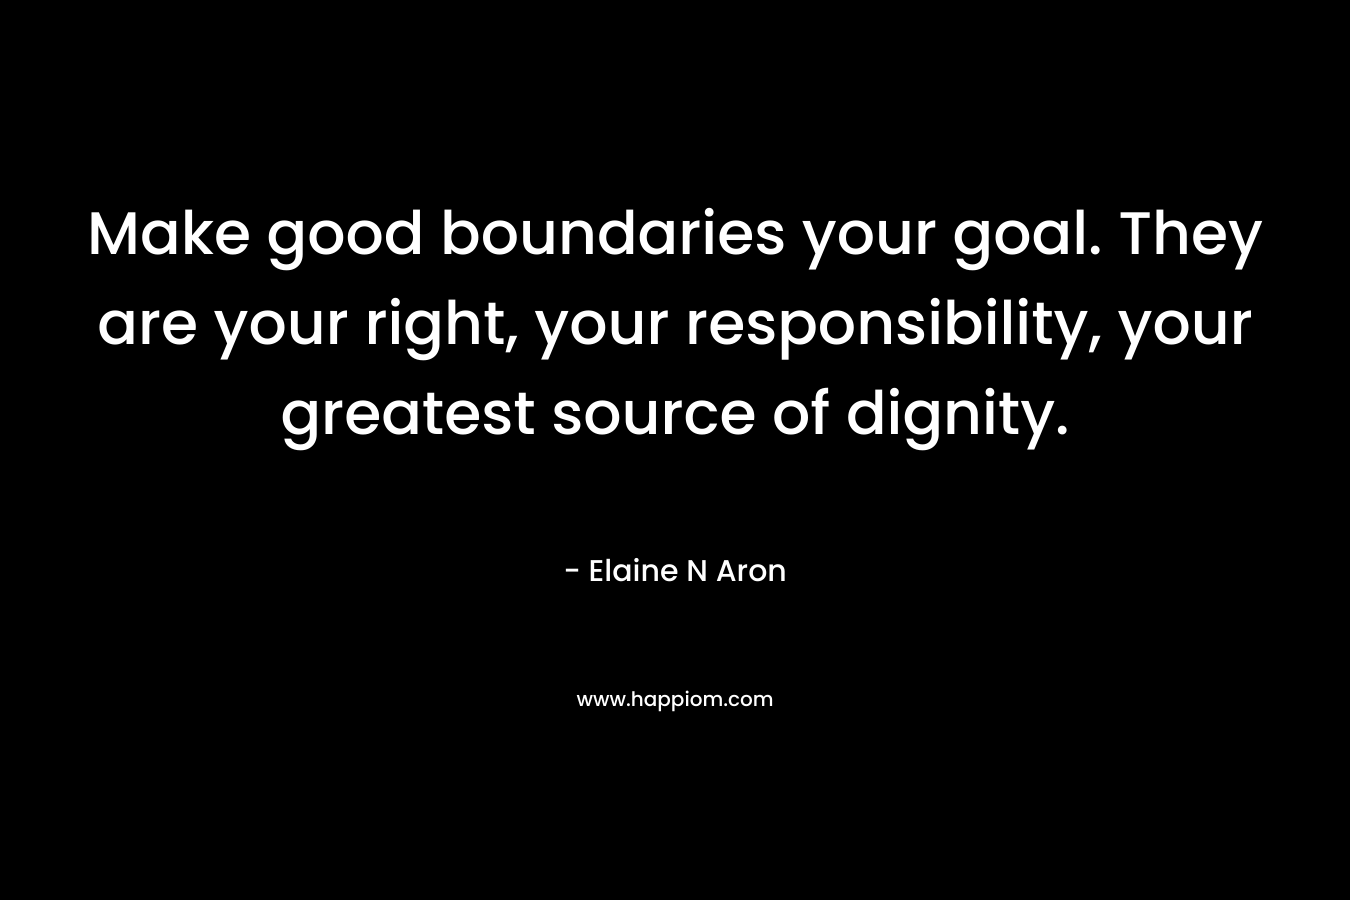 Make good boundaries your goal. They are your right, your responsibility, your greatest source of dignity.